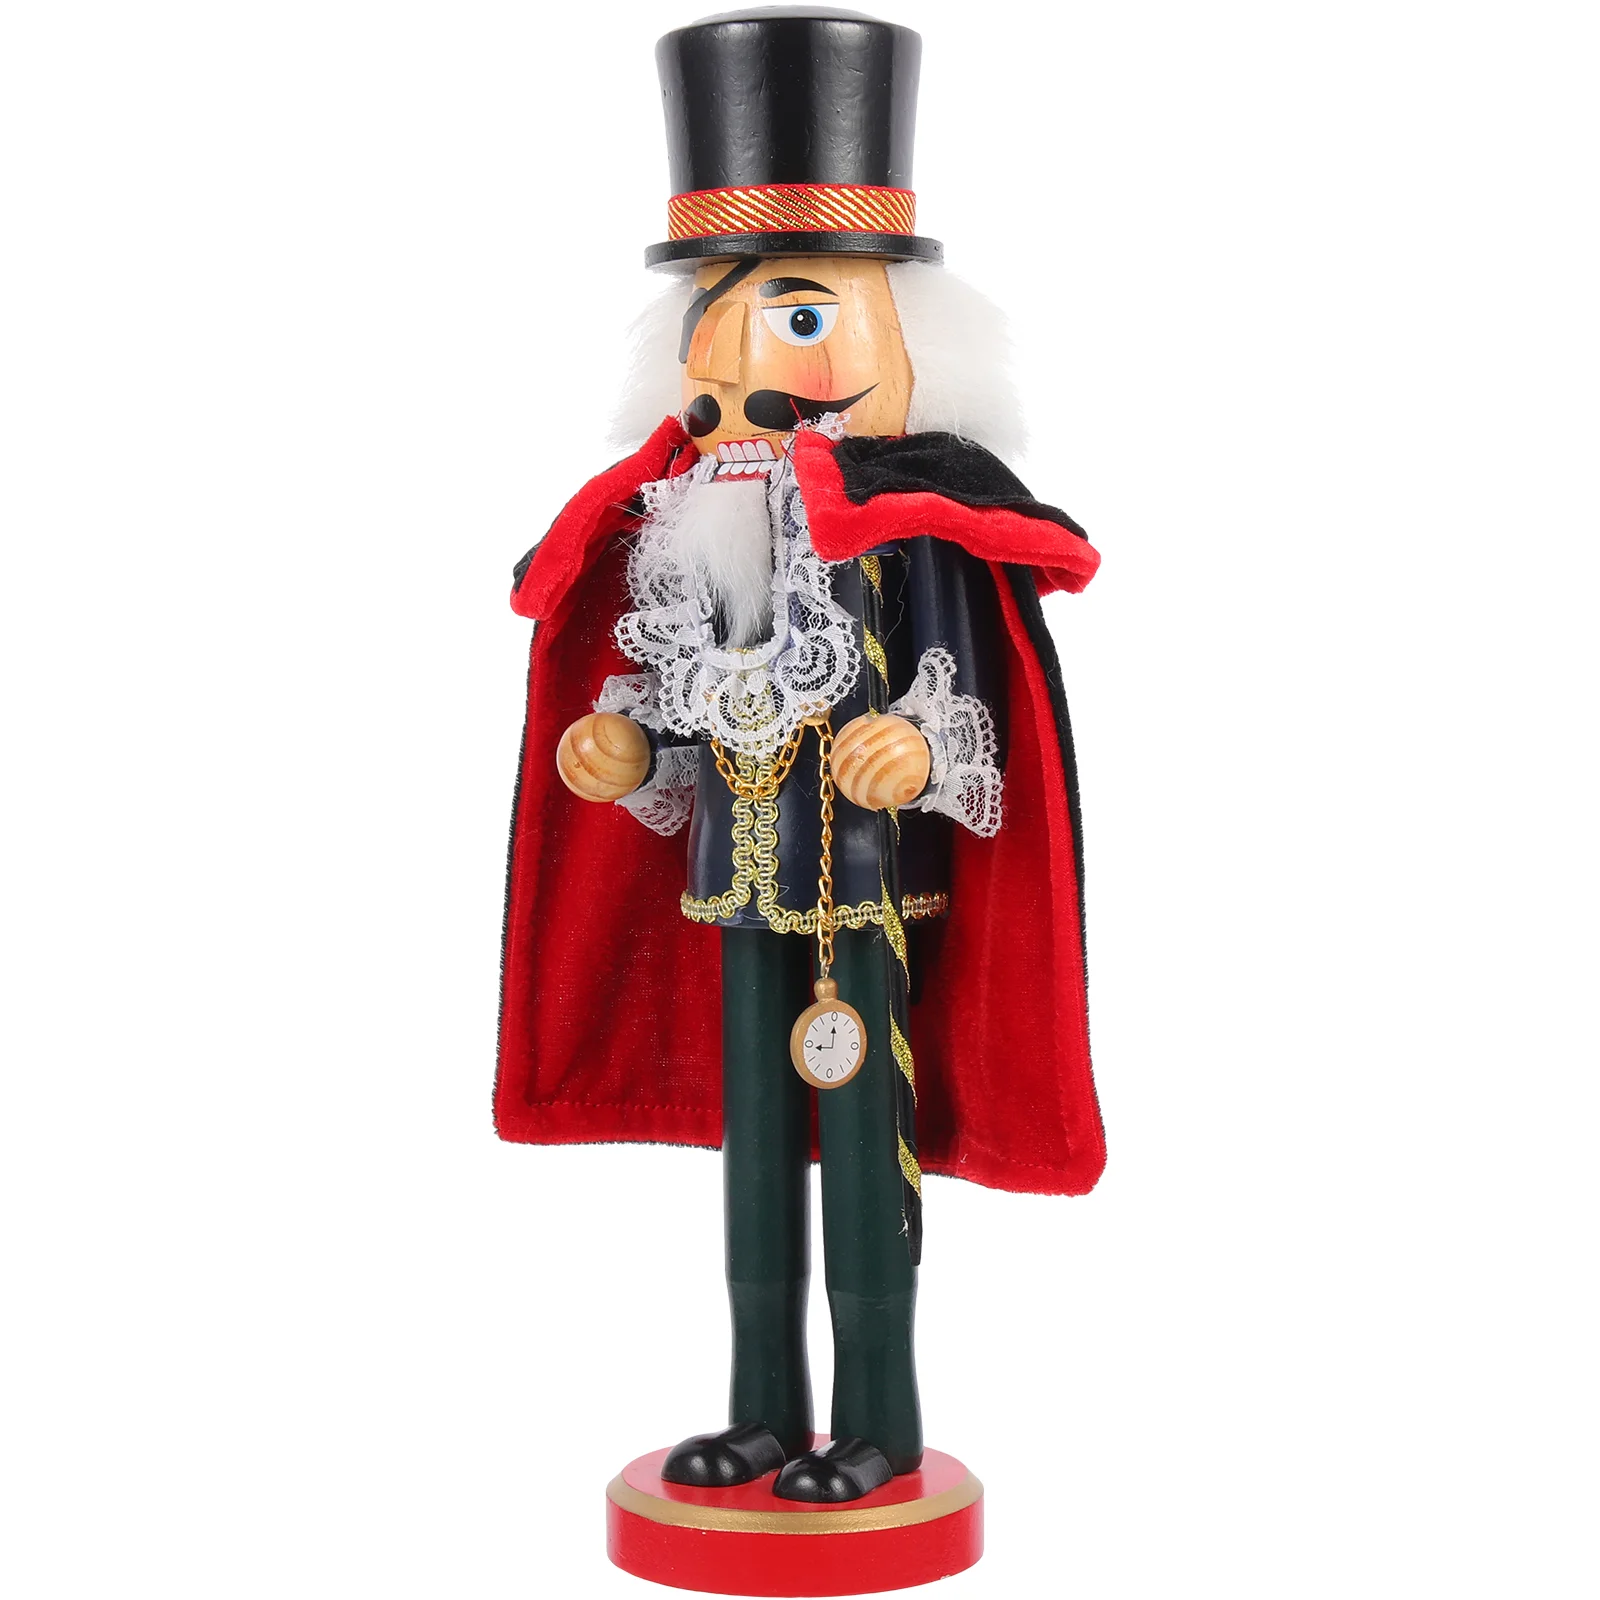 

Pirate Nutcracker Outdoor Play Toys Kids Small Ornament Unique Nutcrackers Traditional Wood Holiday Tall Festival Work